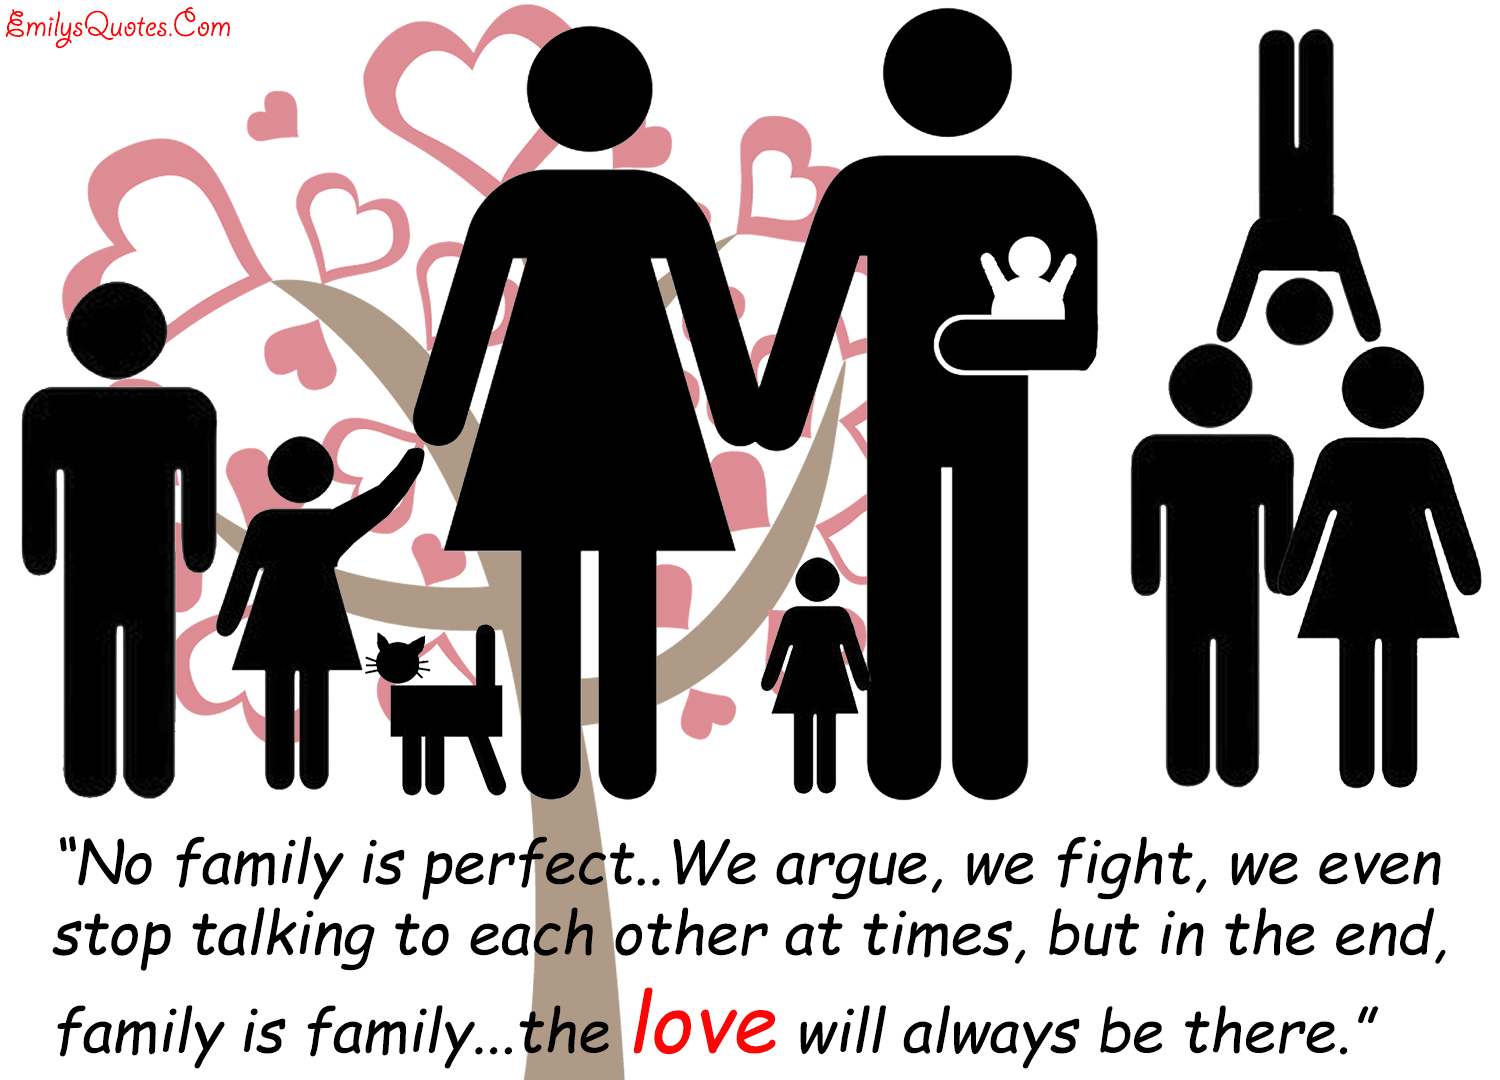 No family is perfect..We argue, we fight, we even stop talking to each other at times, but in the end, family is family…